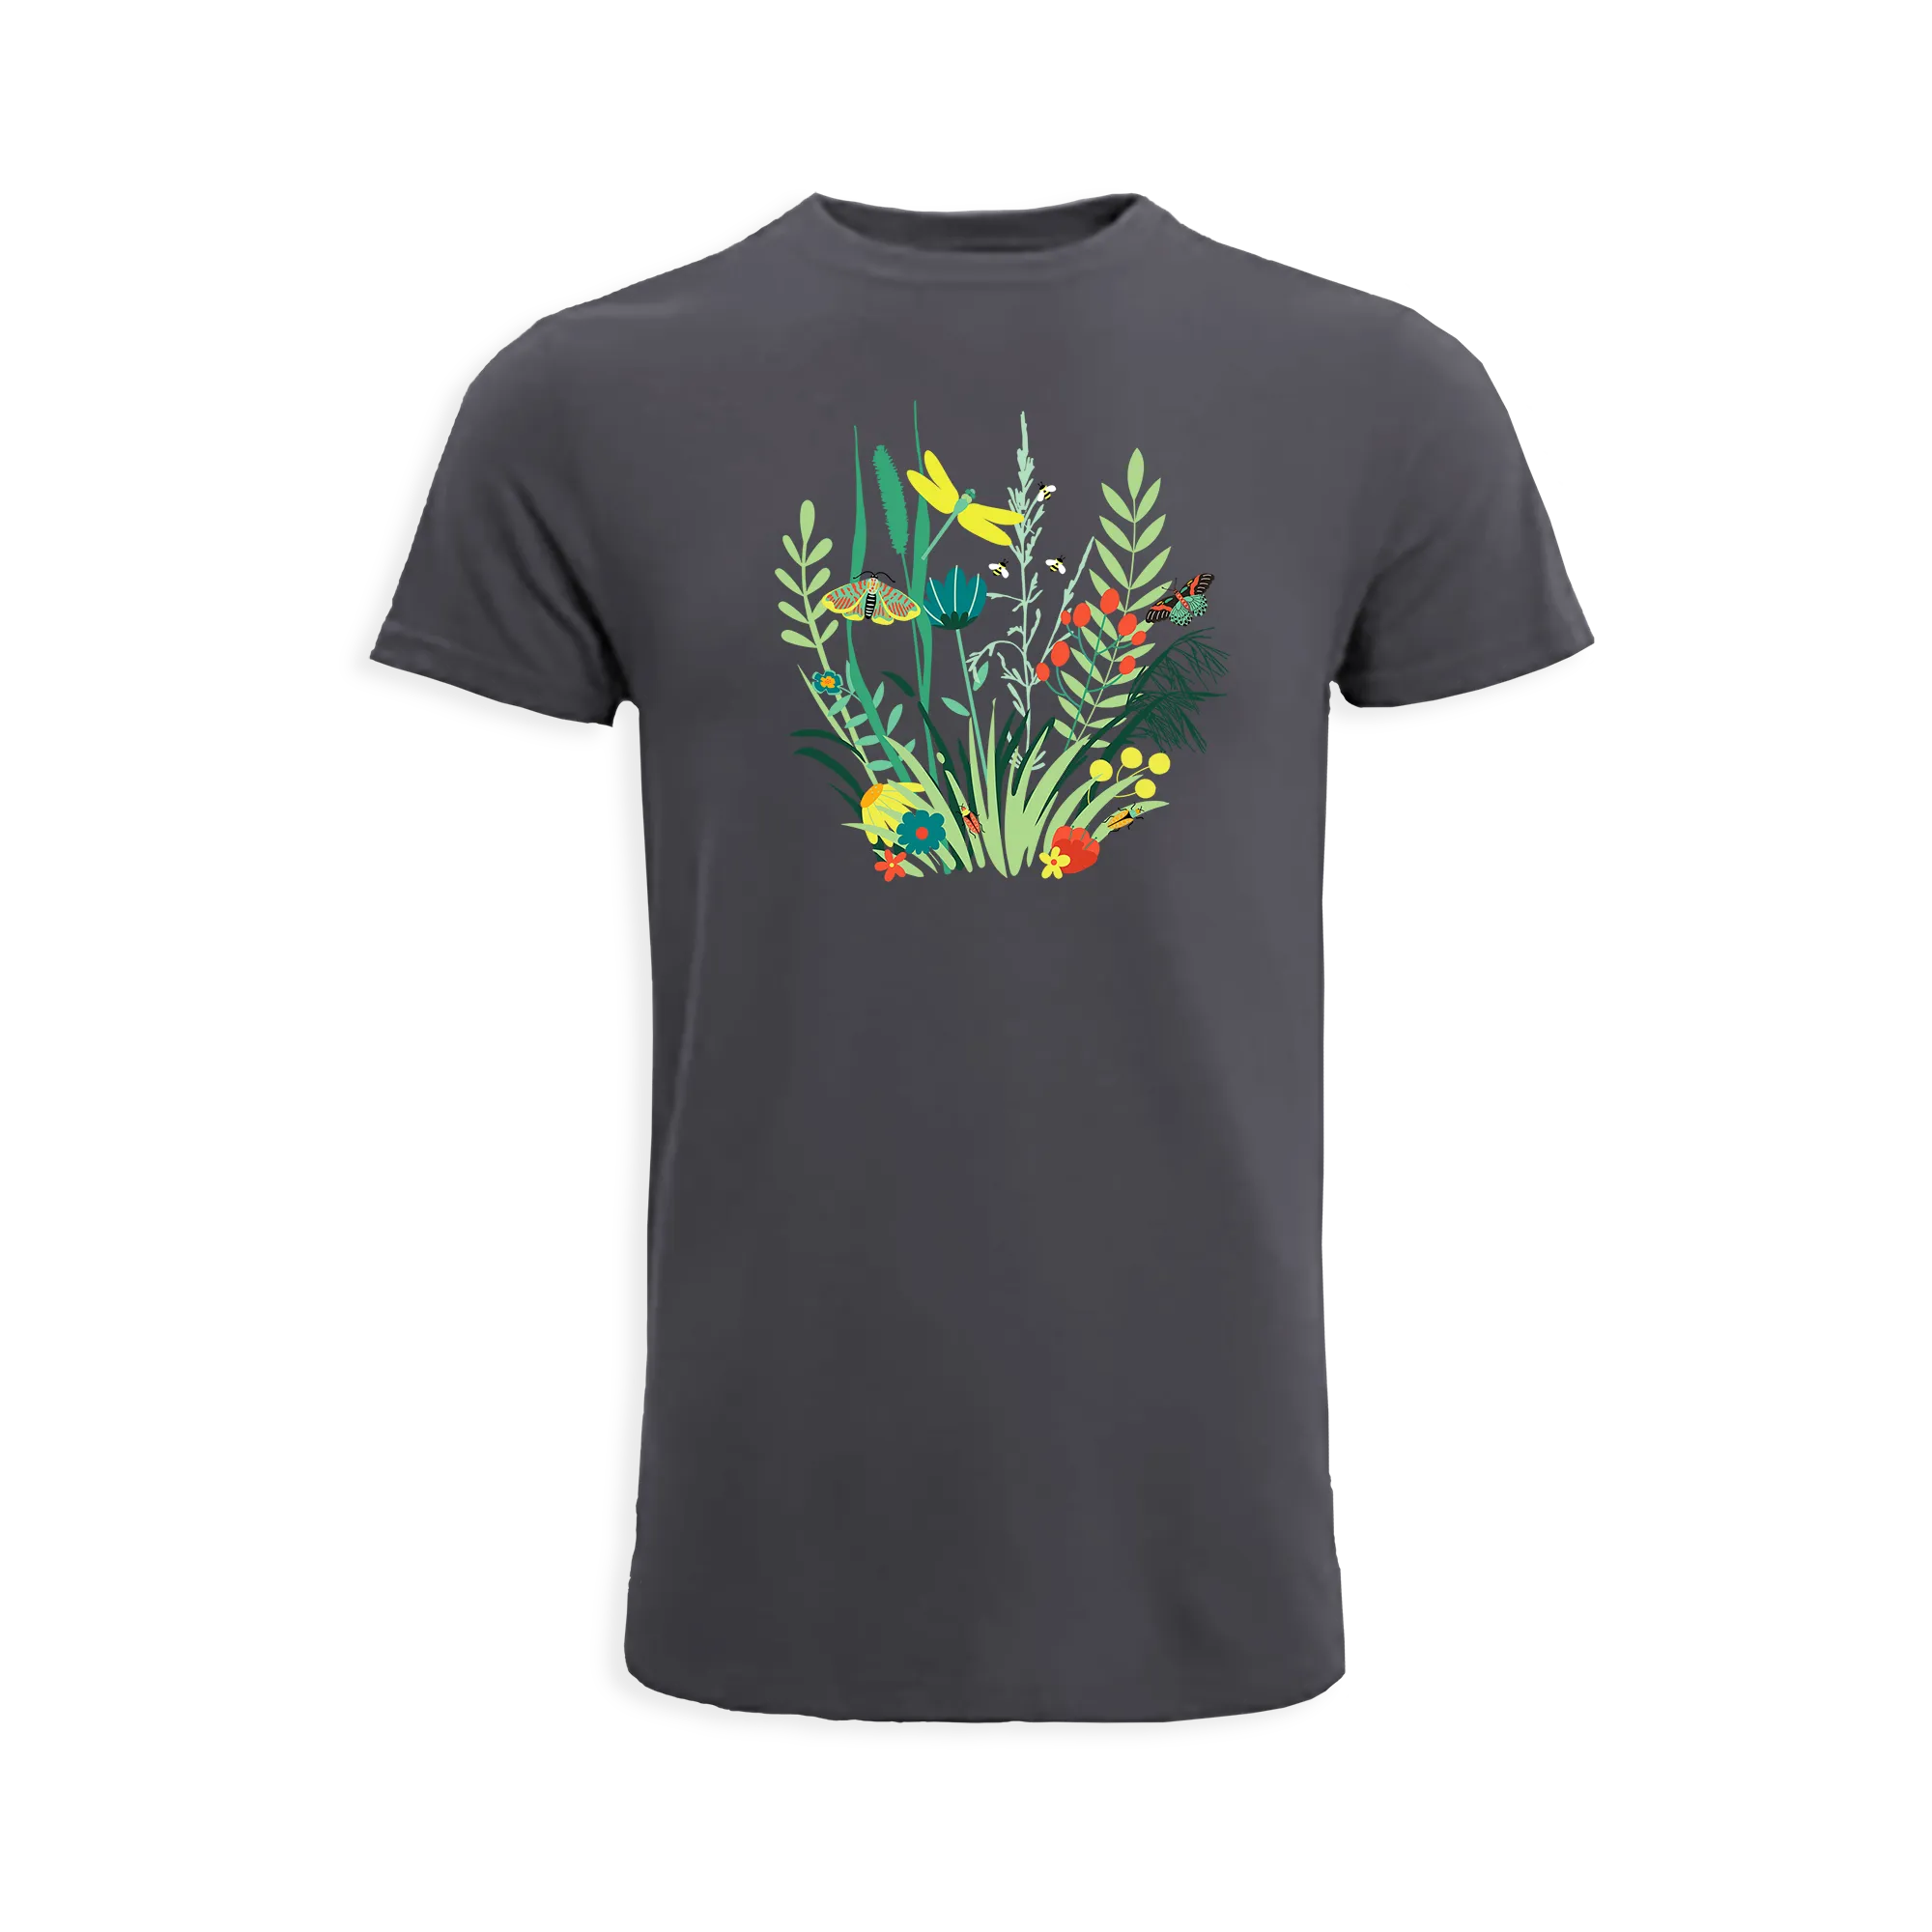 Visit the Pollinator Tee - Multicolor Product Page